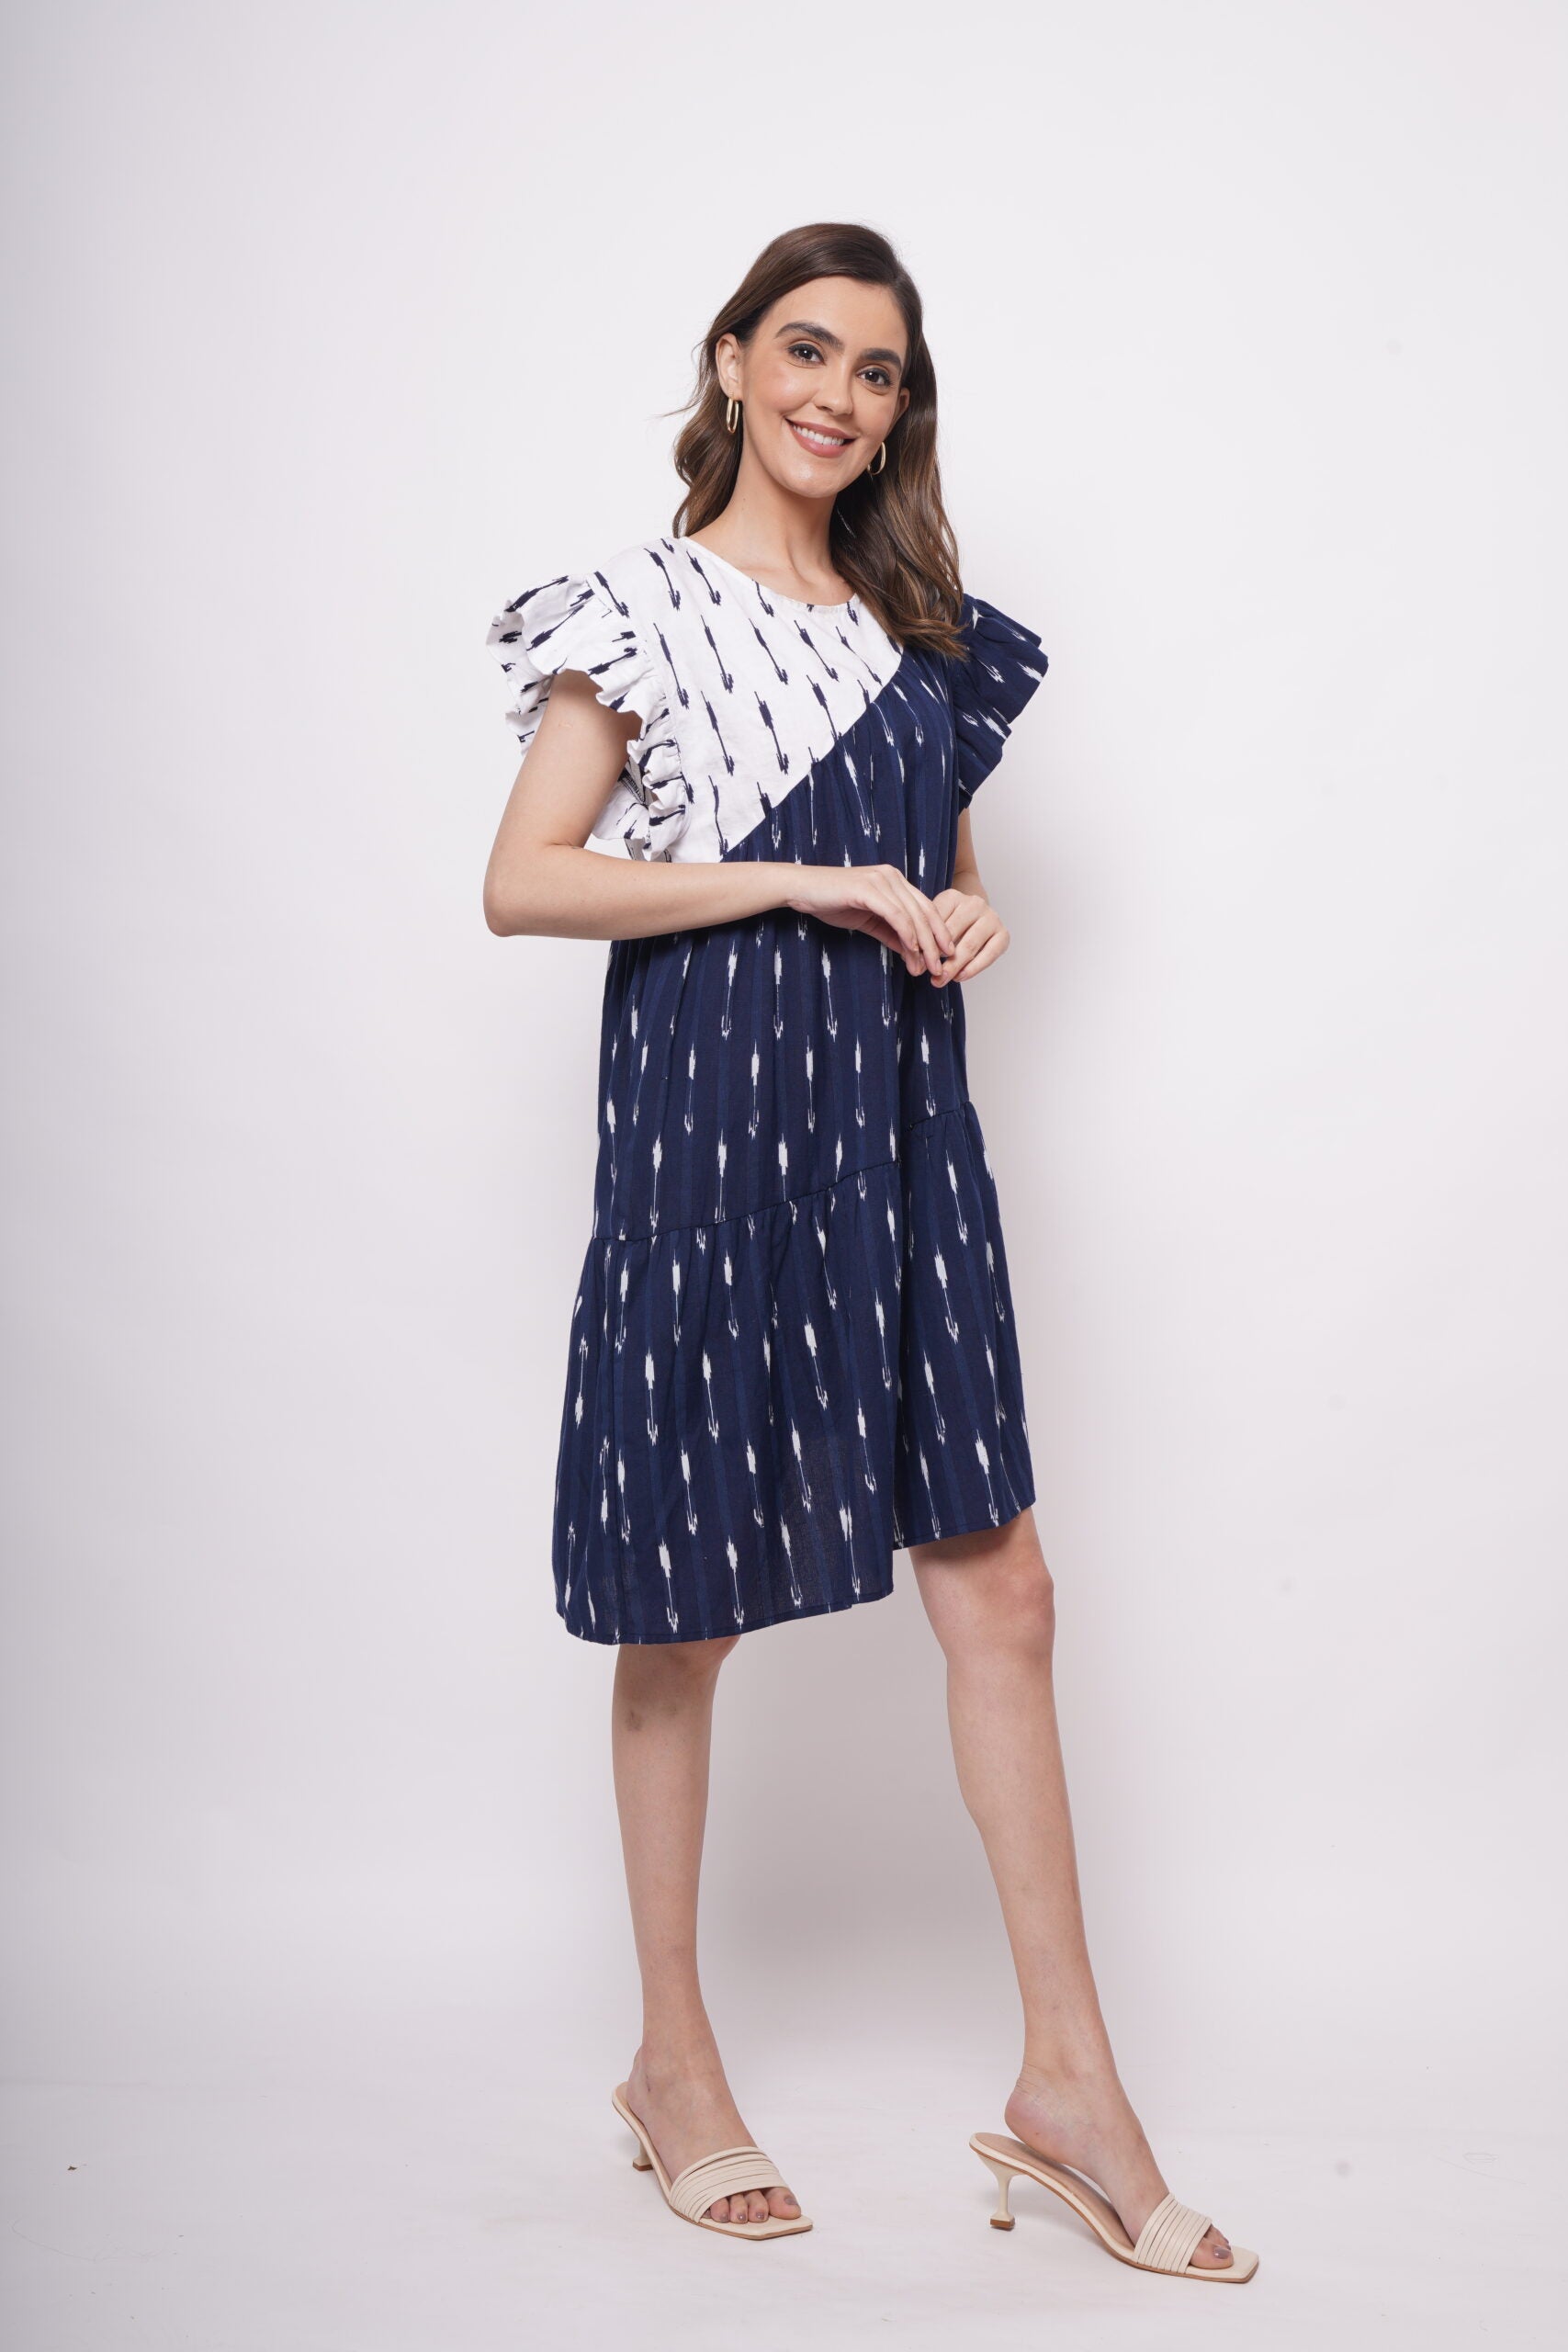 Patch Embroidered Oversized Dress - Western Era  Dresses